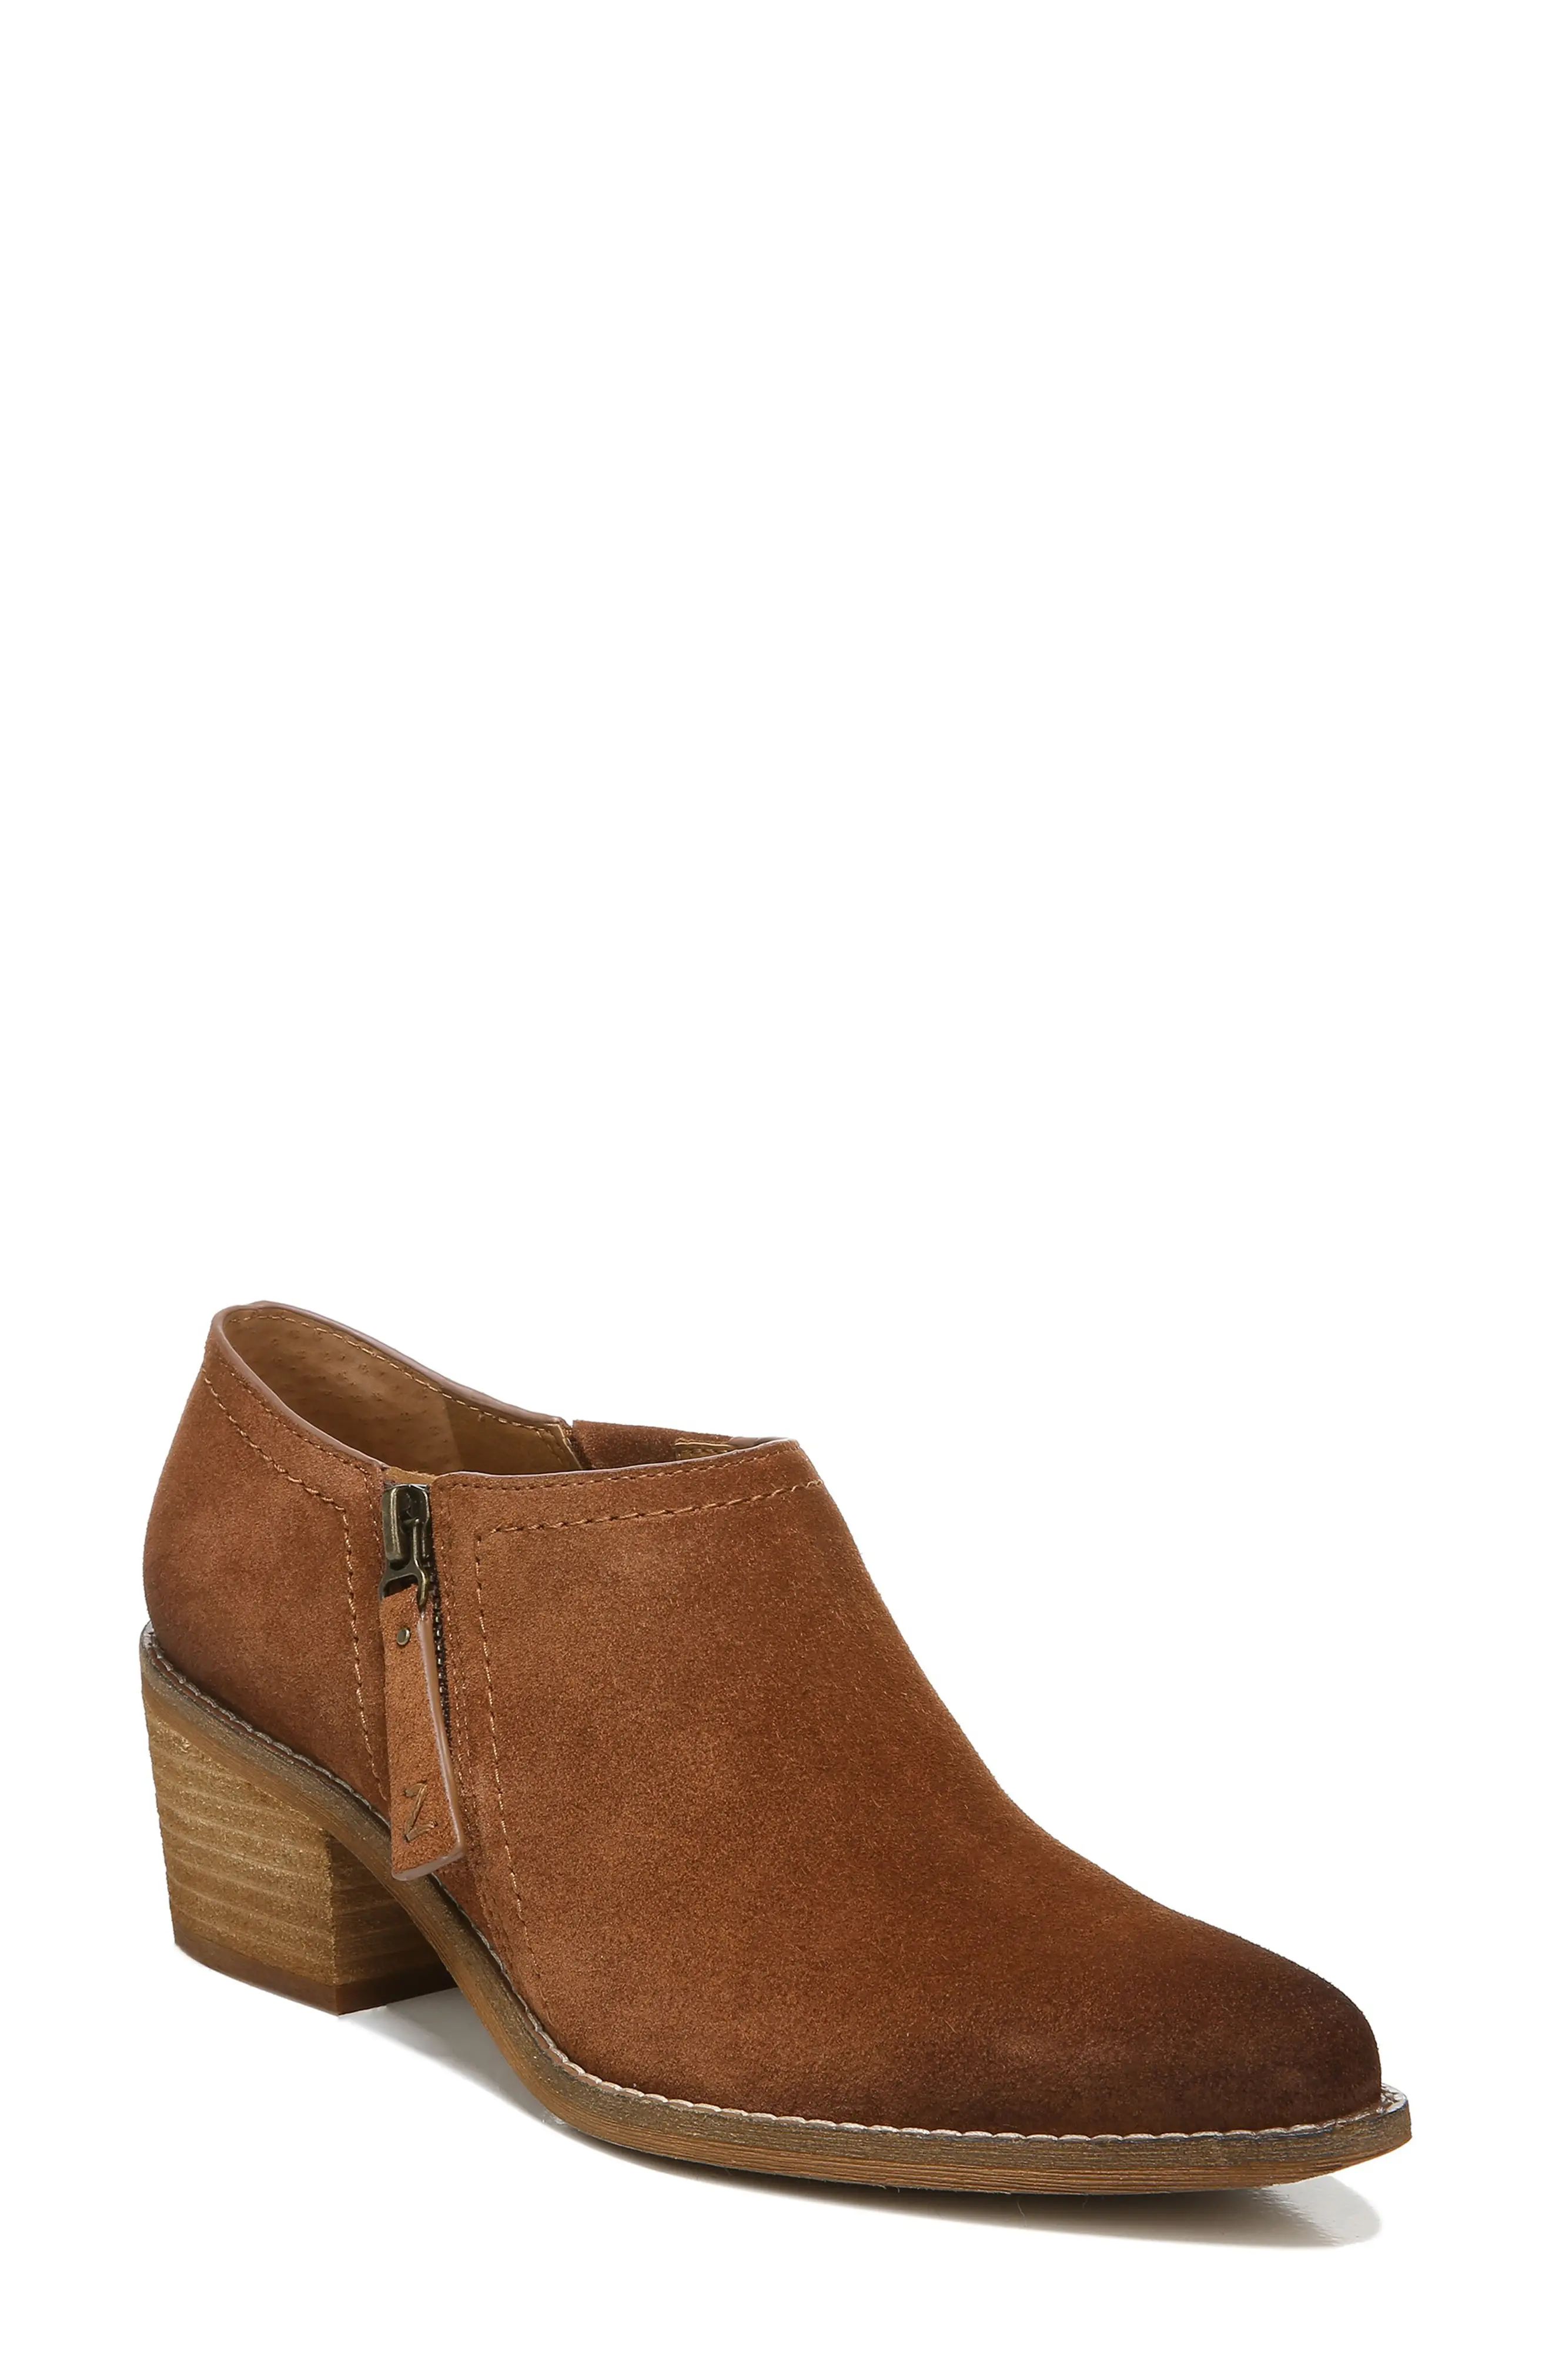 Zodiac Margot Ankle Boot, Size 5.5 in Cognac at Nordstrom | Nordstrom